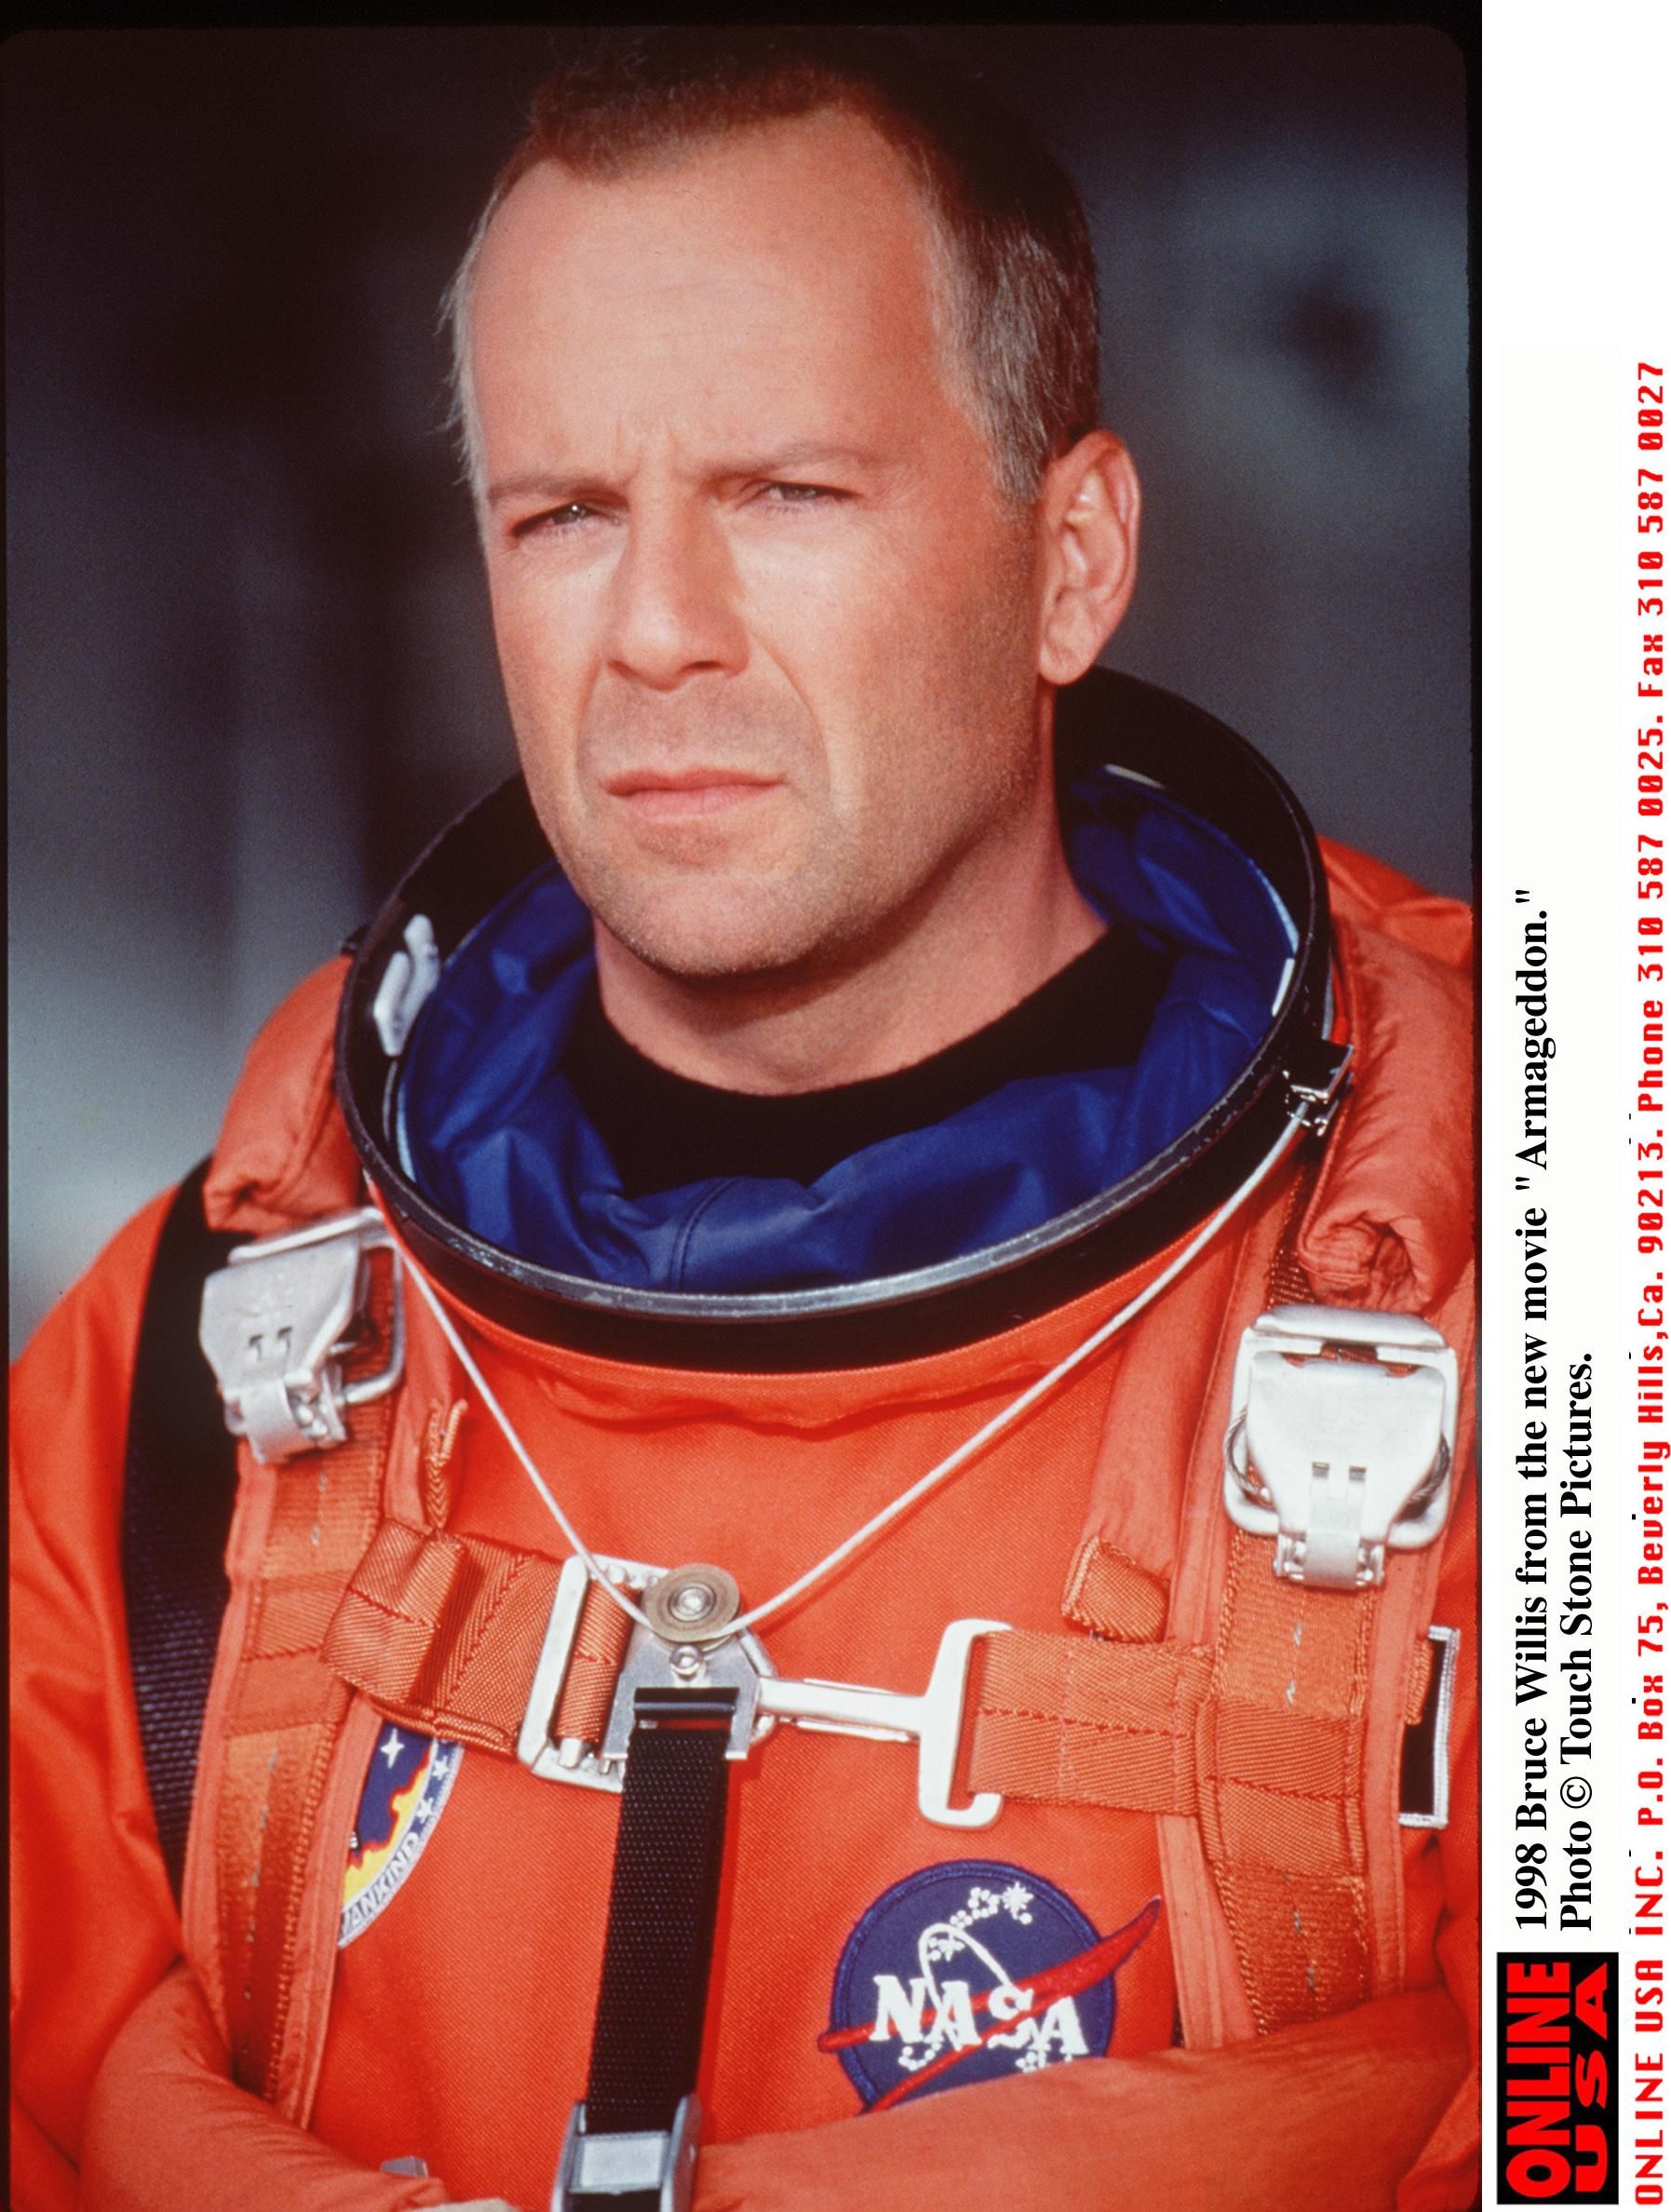 Bruce Willis In "Armageddon." | Source: Getty Images